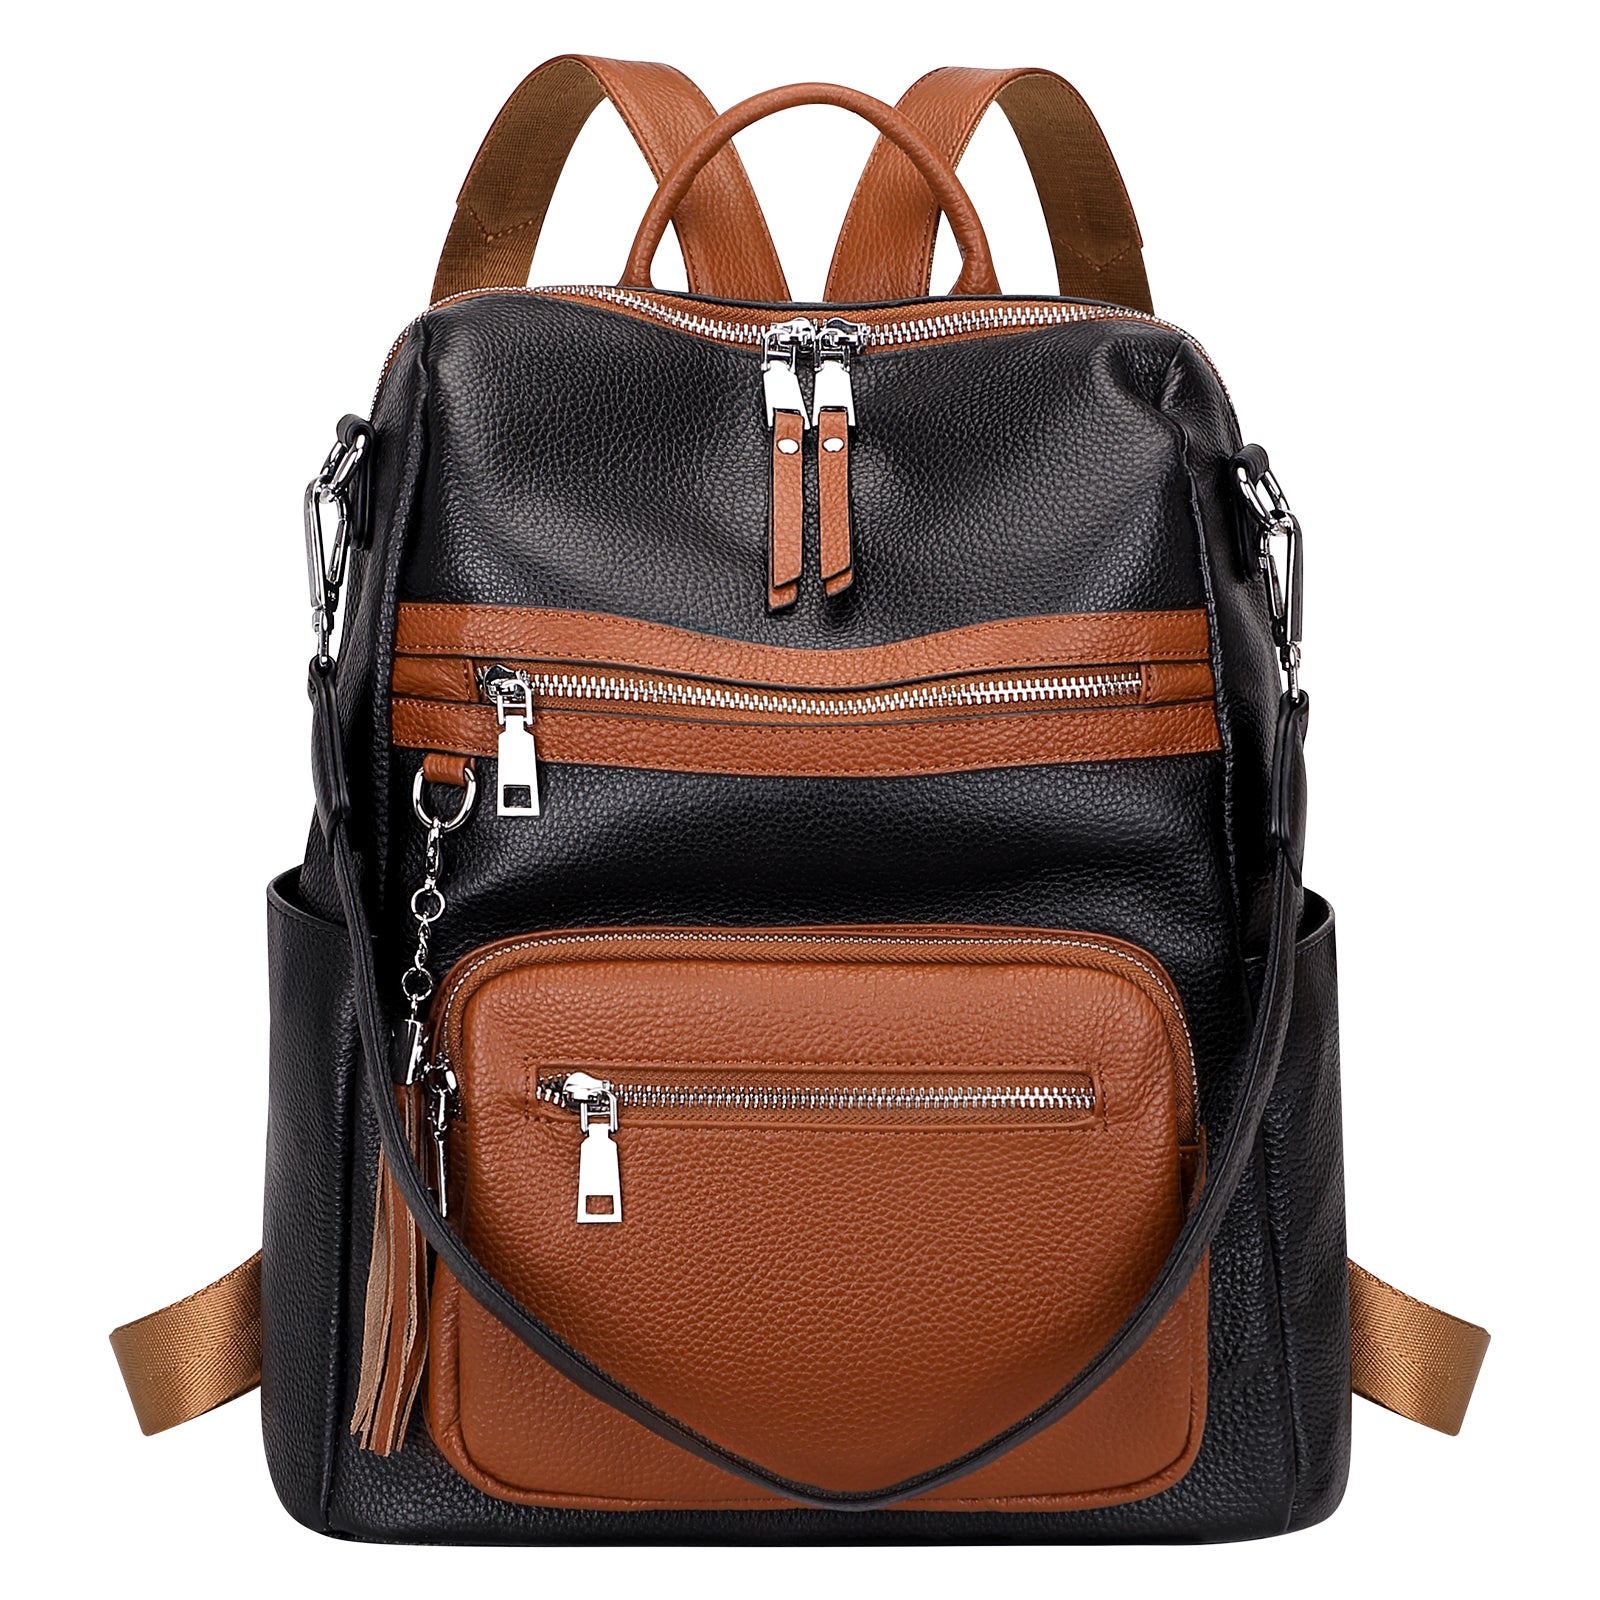 Anti Theft PU Leather Womens Leather Backpack For Women Purse Fashionable  Shoulder Bag For Casual And Formal Use From Sarahzhang88, $21.32 |  DHgate.Com